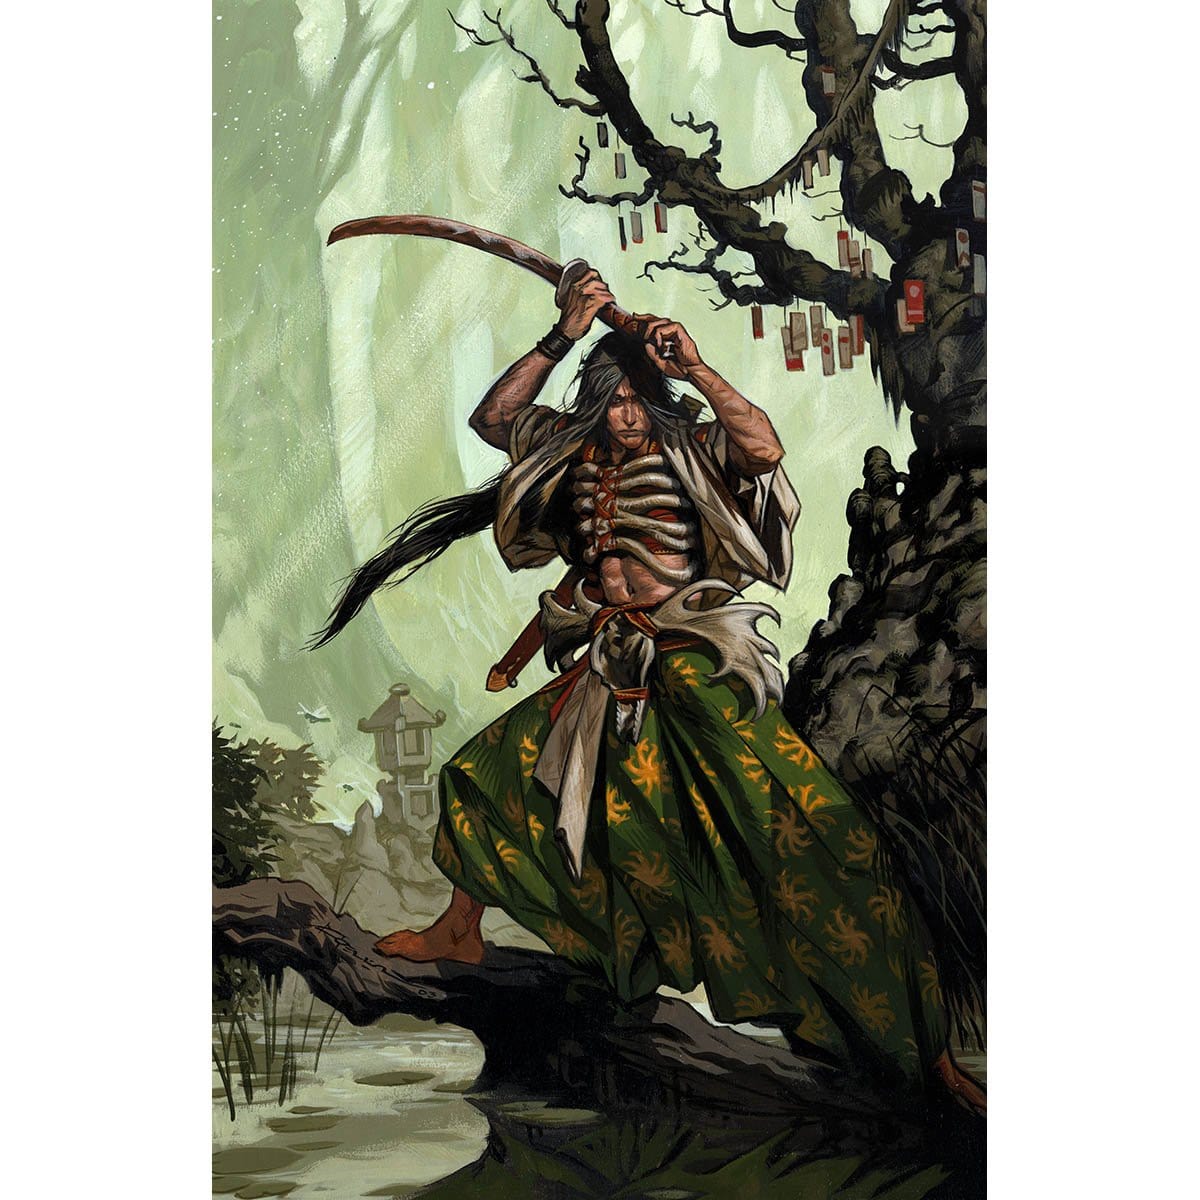 Isao, Enlightened Bushi Print - Print - Original Magic Art - Accessories for Magic the Gathering and other card games